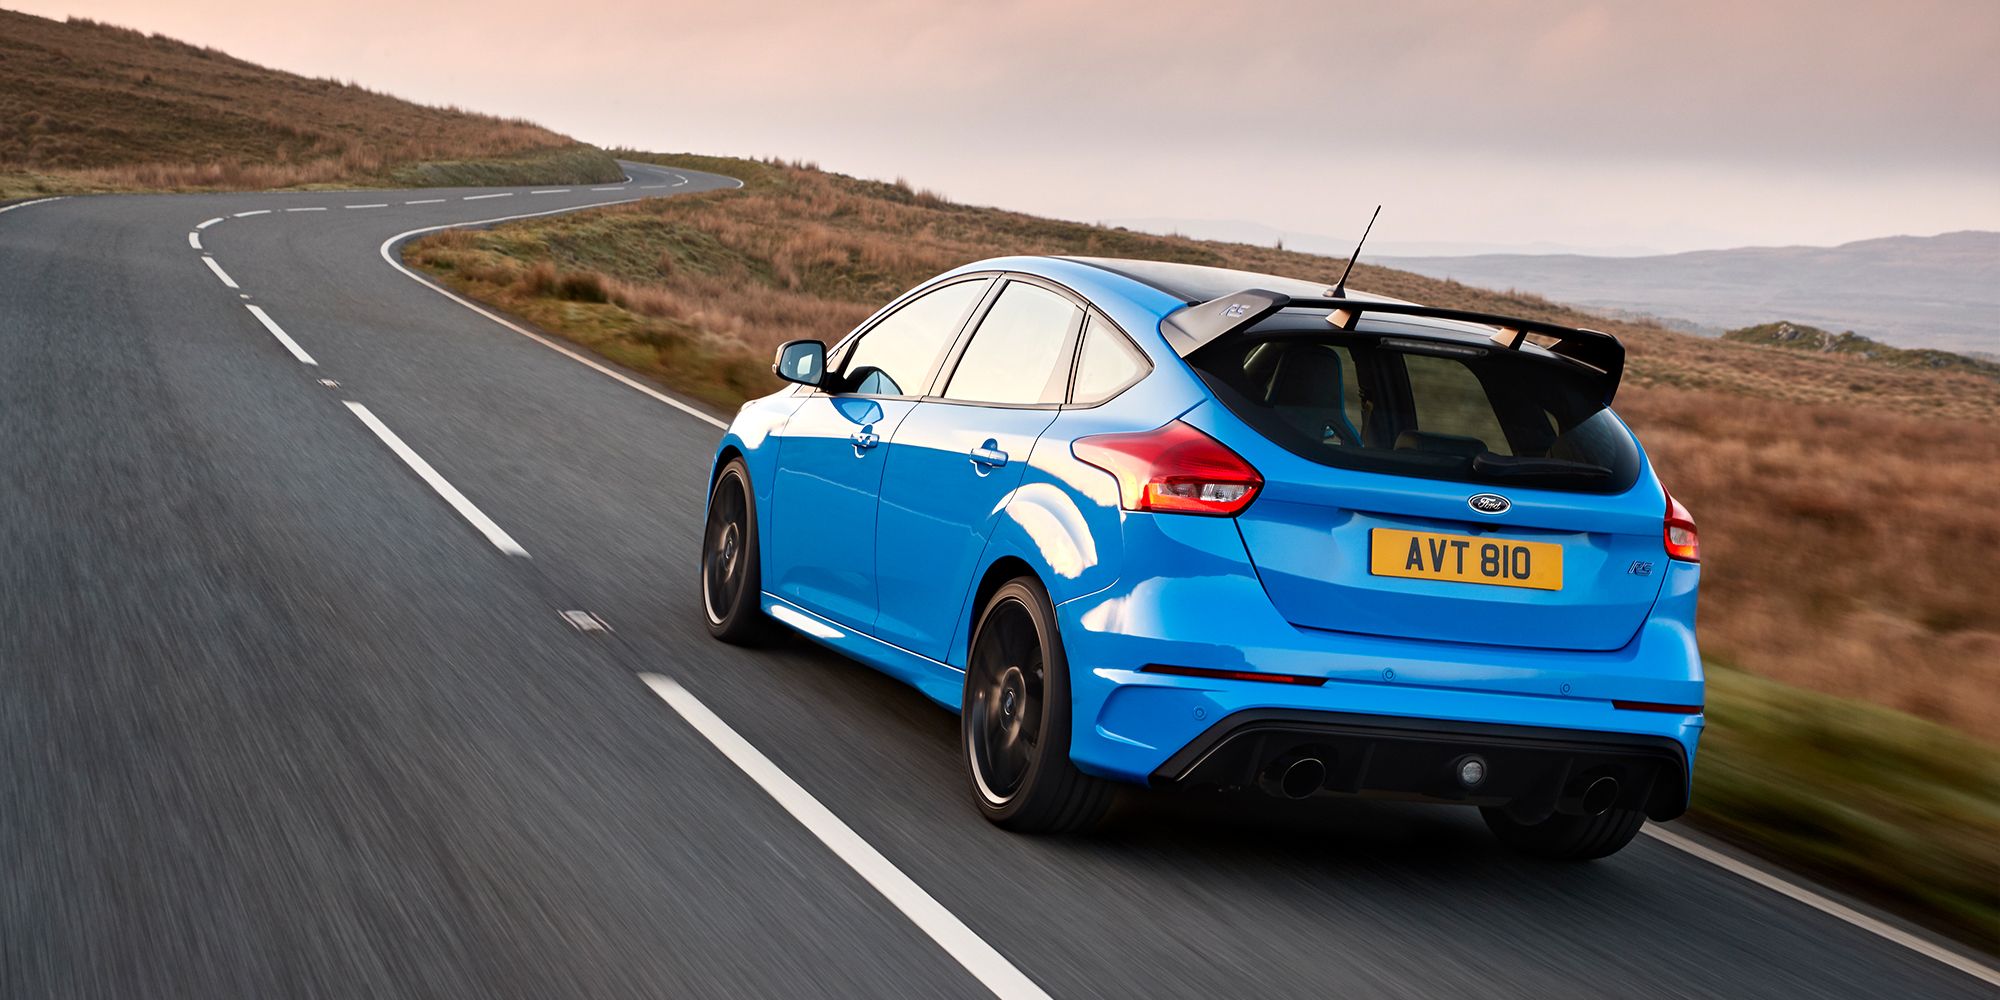 The rear of the Mk3 Focus RS